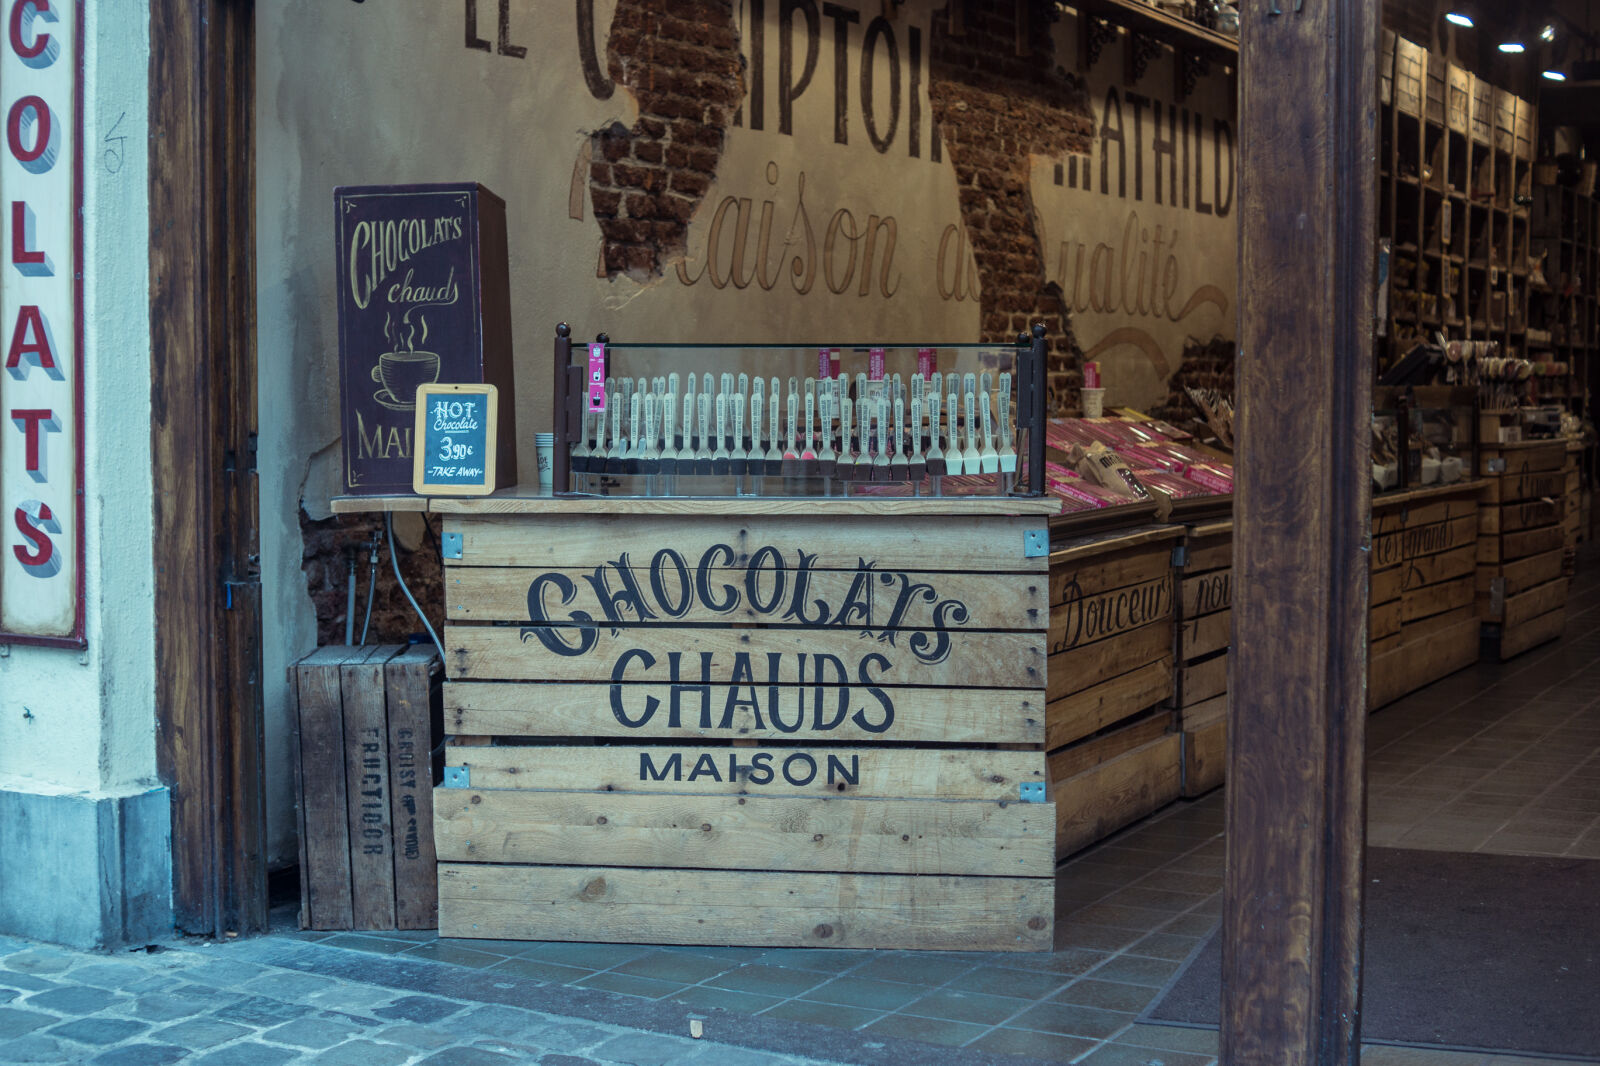 Sony SLT-A77 sample photo. Brussels, chaud, chocolate, maison photography